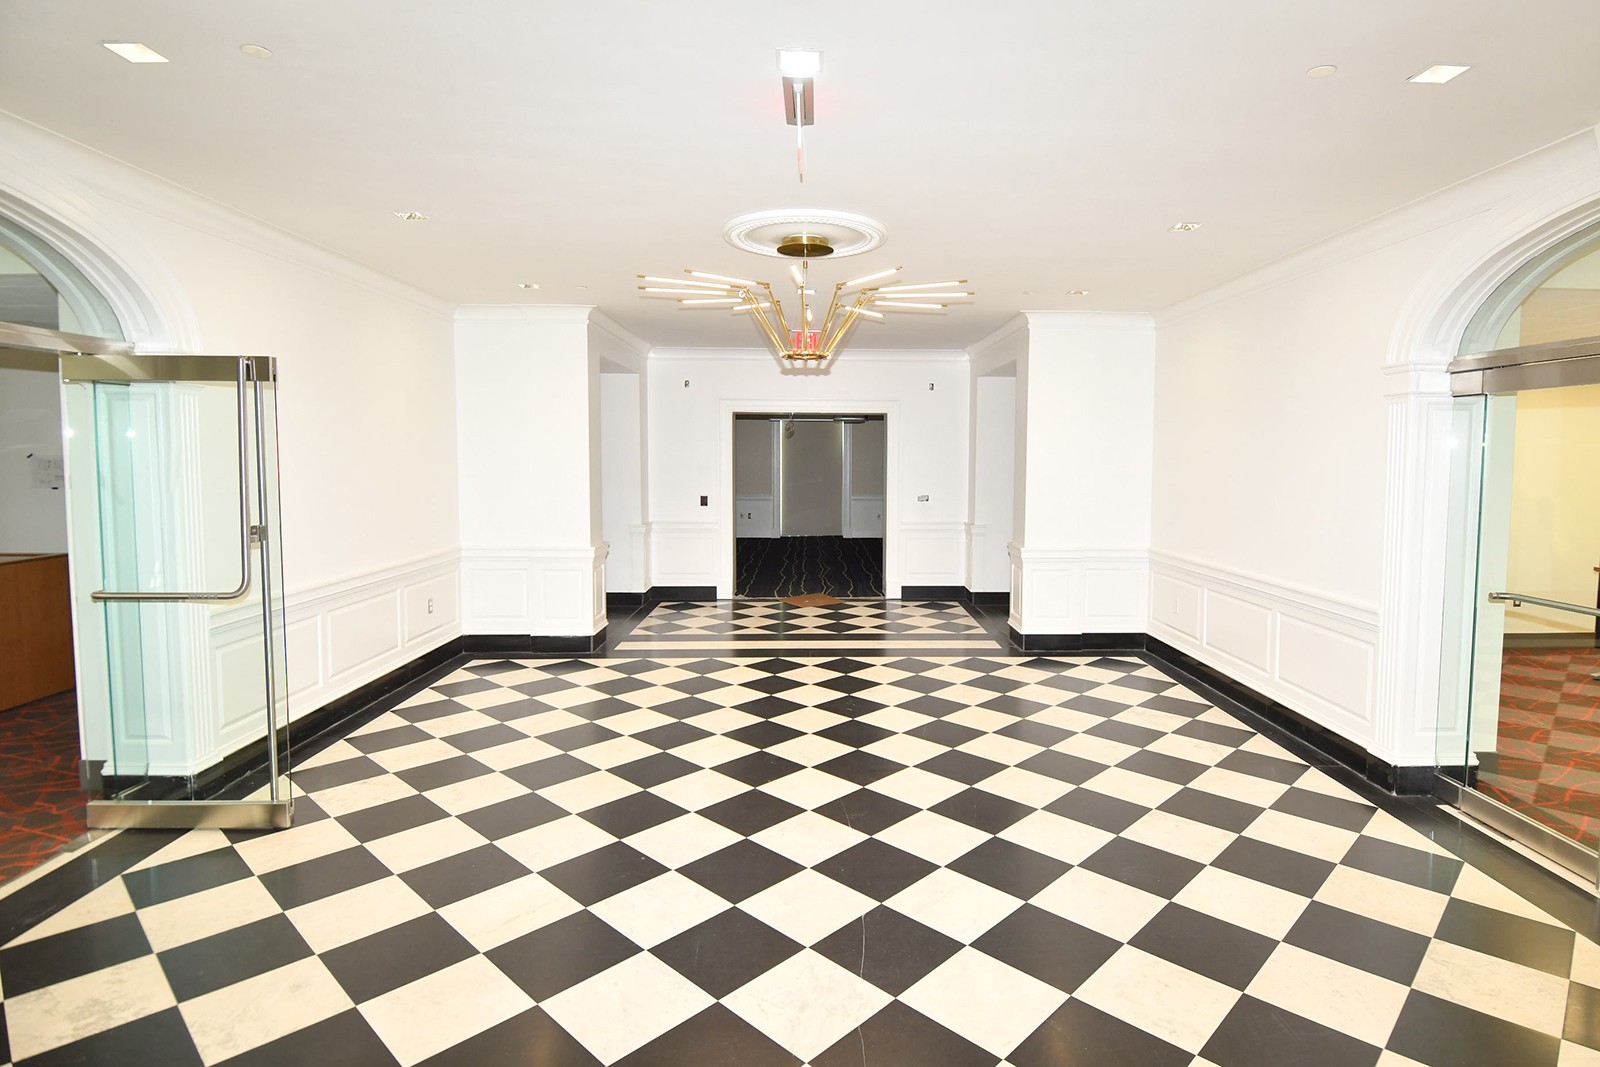 First floor, checkerboard square